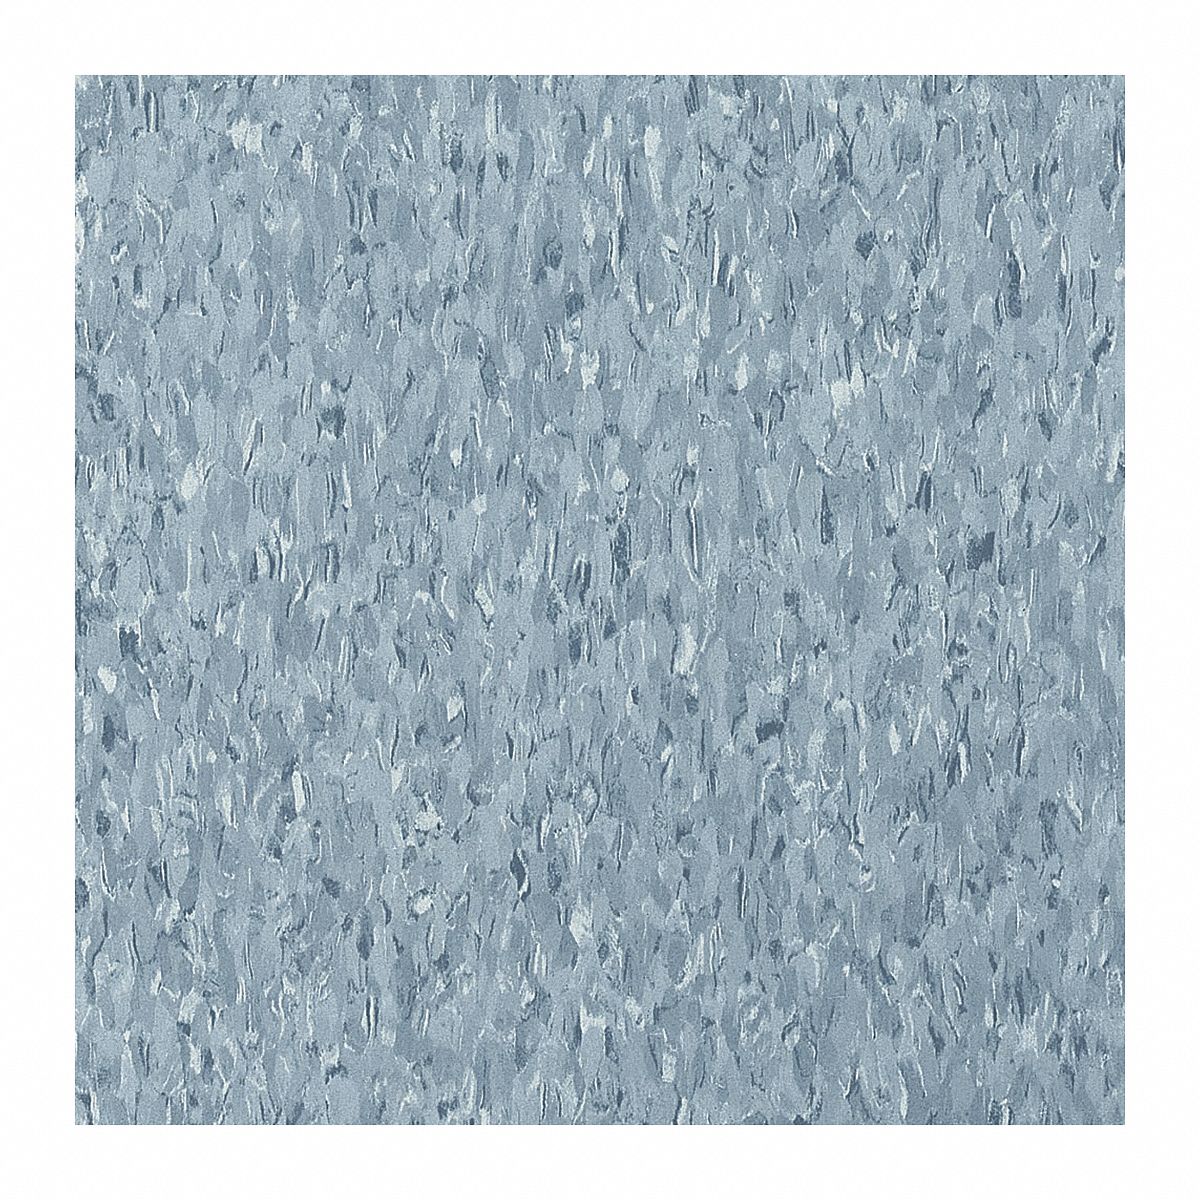 23NY65 - Vinyl Composition Tile 45sq.ft Gray